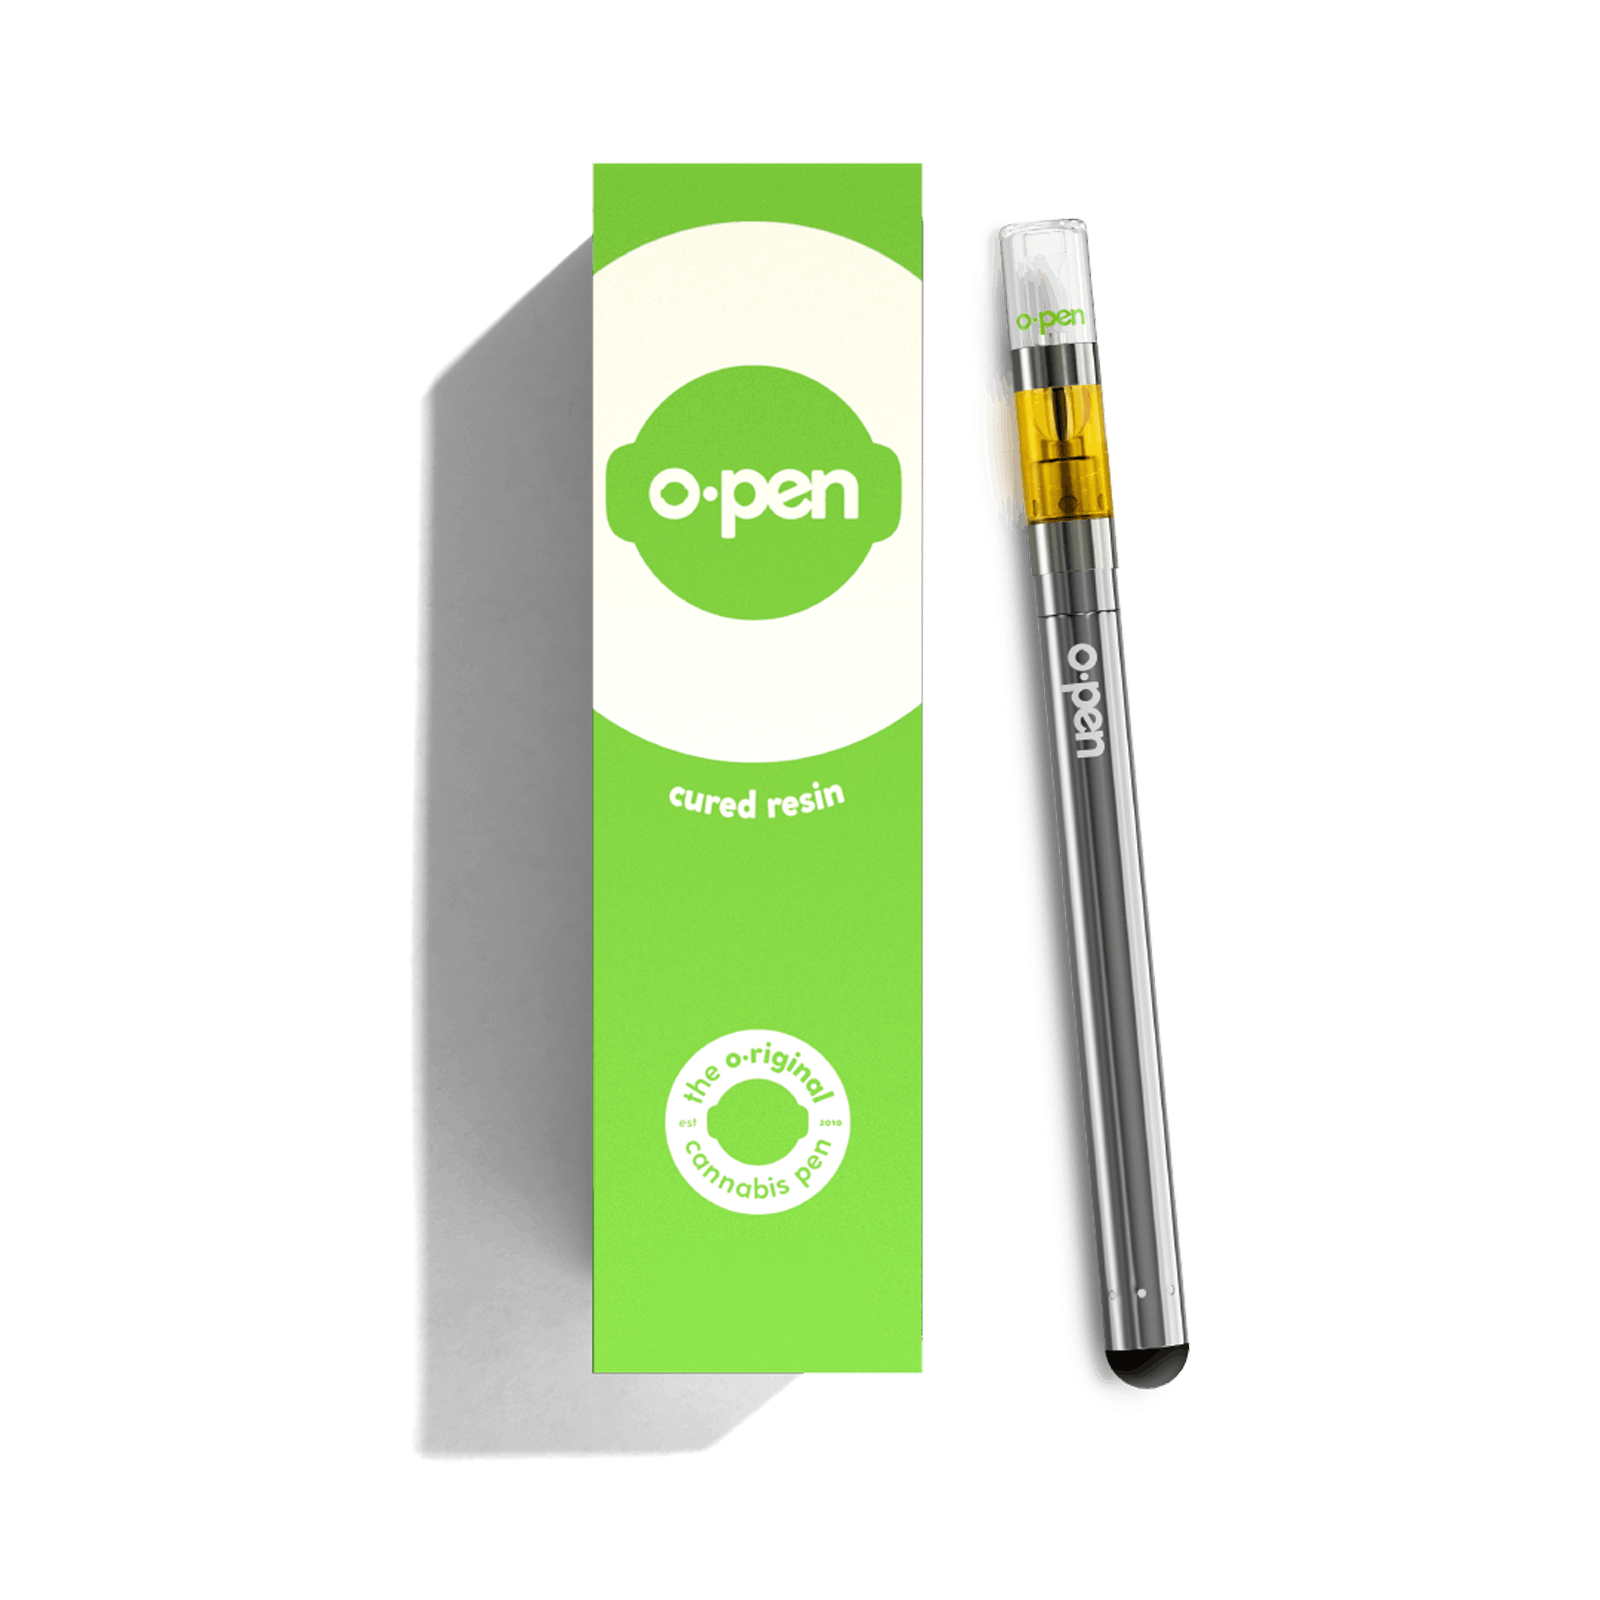 Grapes and Cream Cured Resin Cartridge